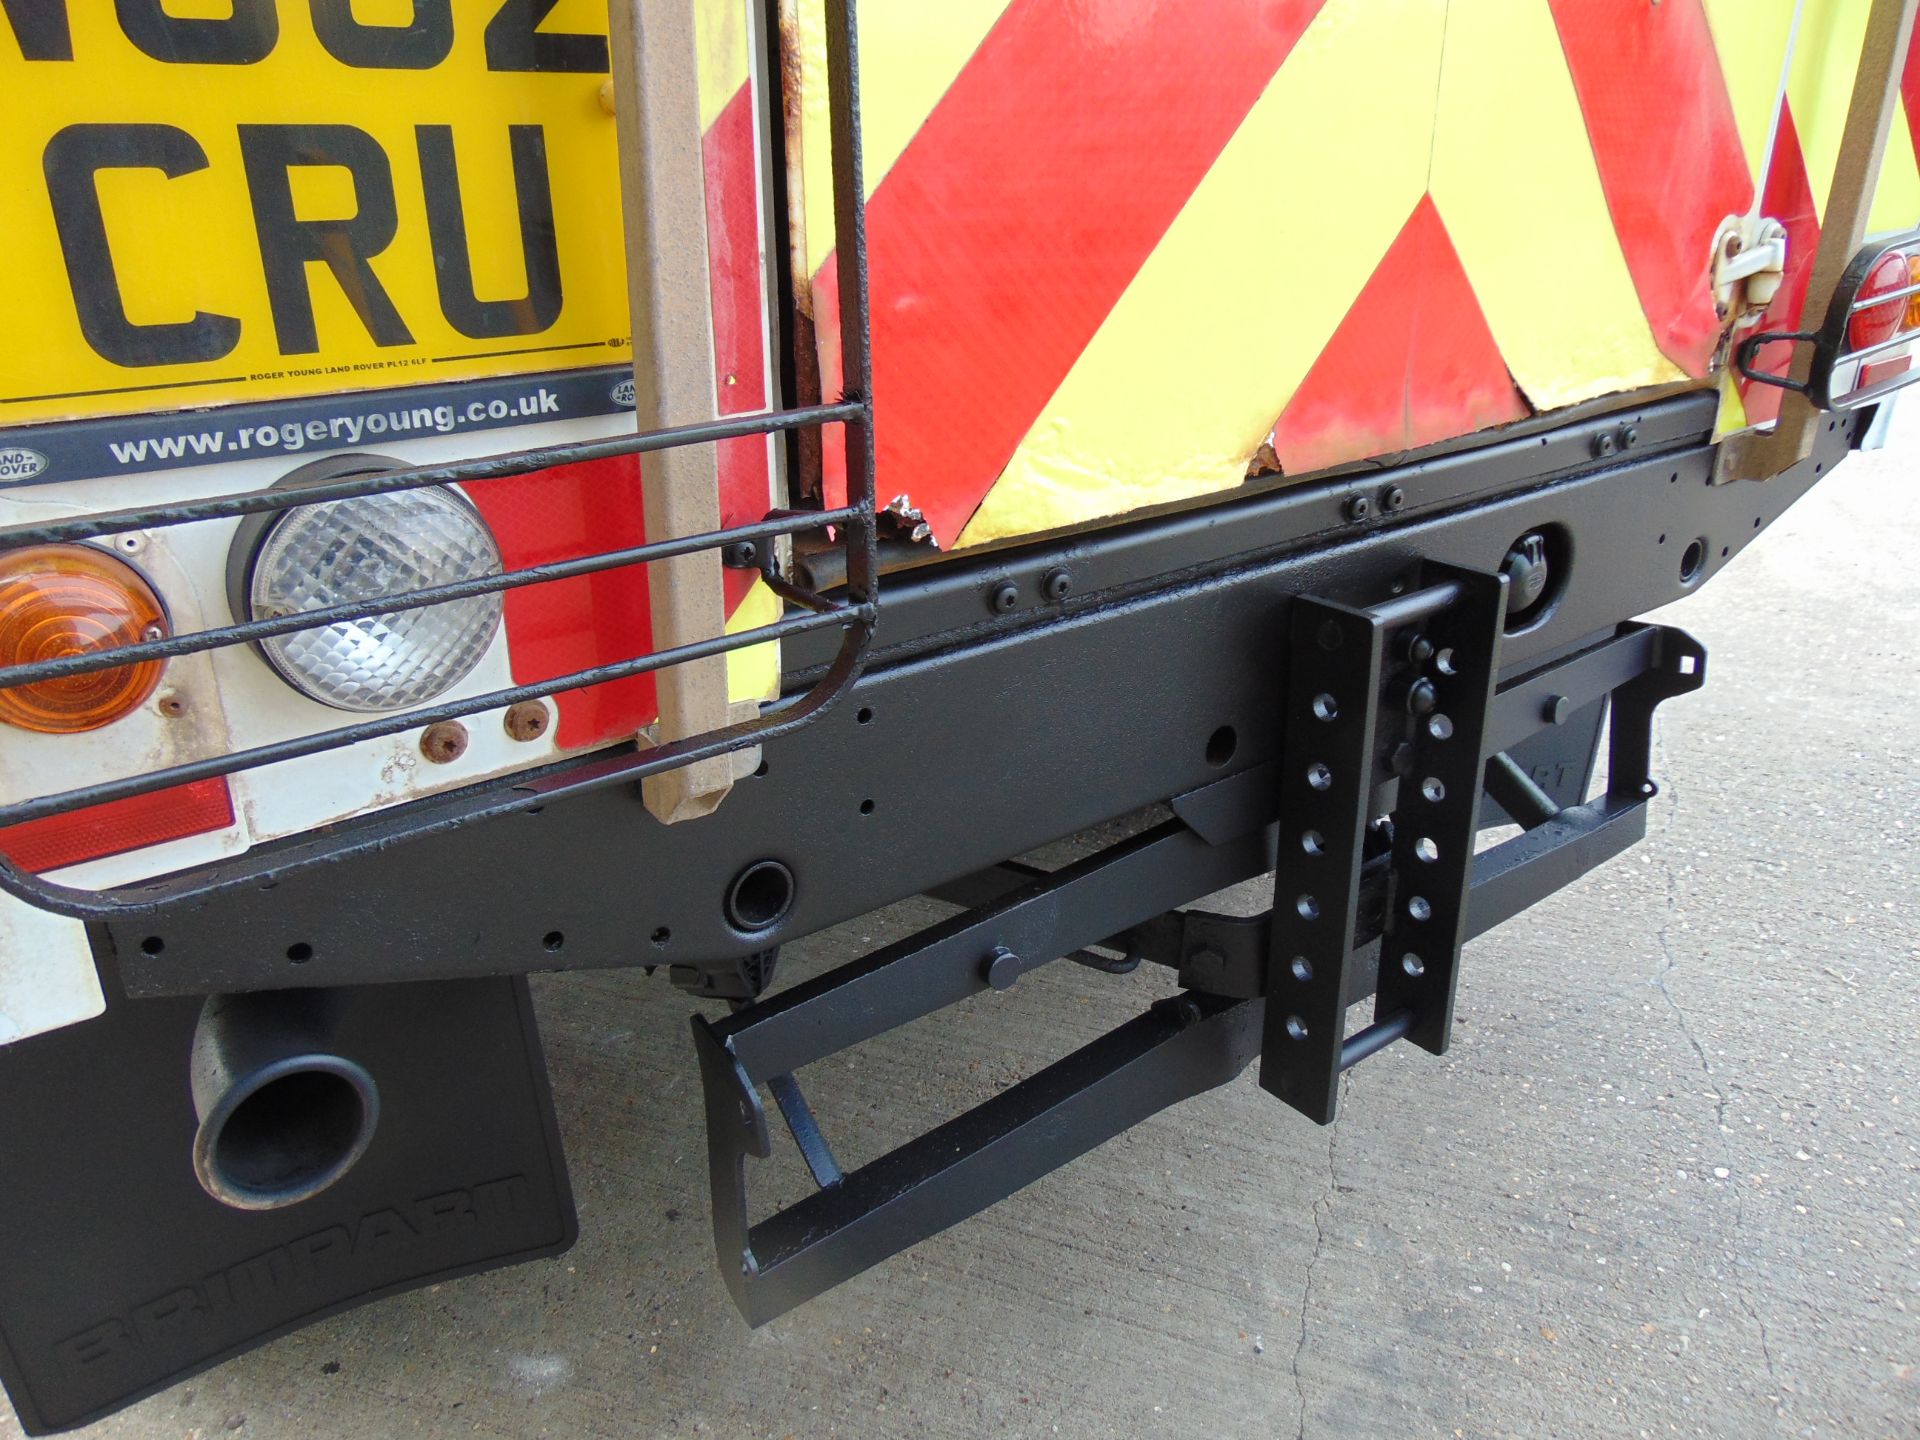 2013 Land Rover Defender 110 Puma hardtop 4x4 Utility vehicle (mobile workshop) with hydraulic winch - Image 11 of 44